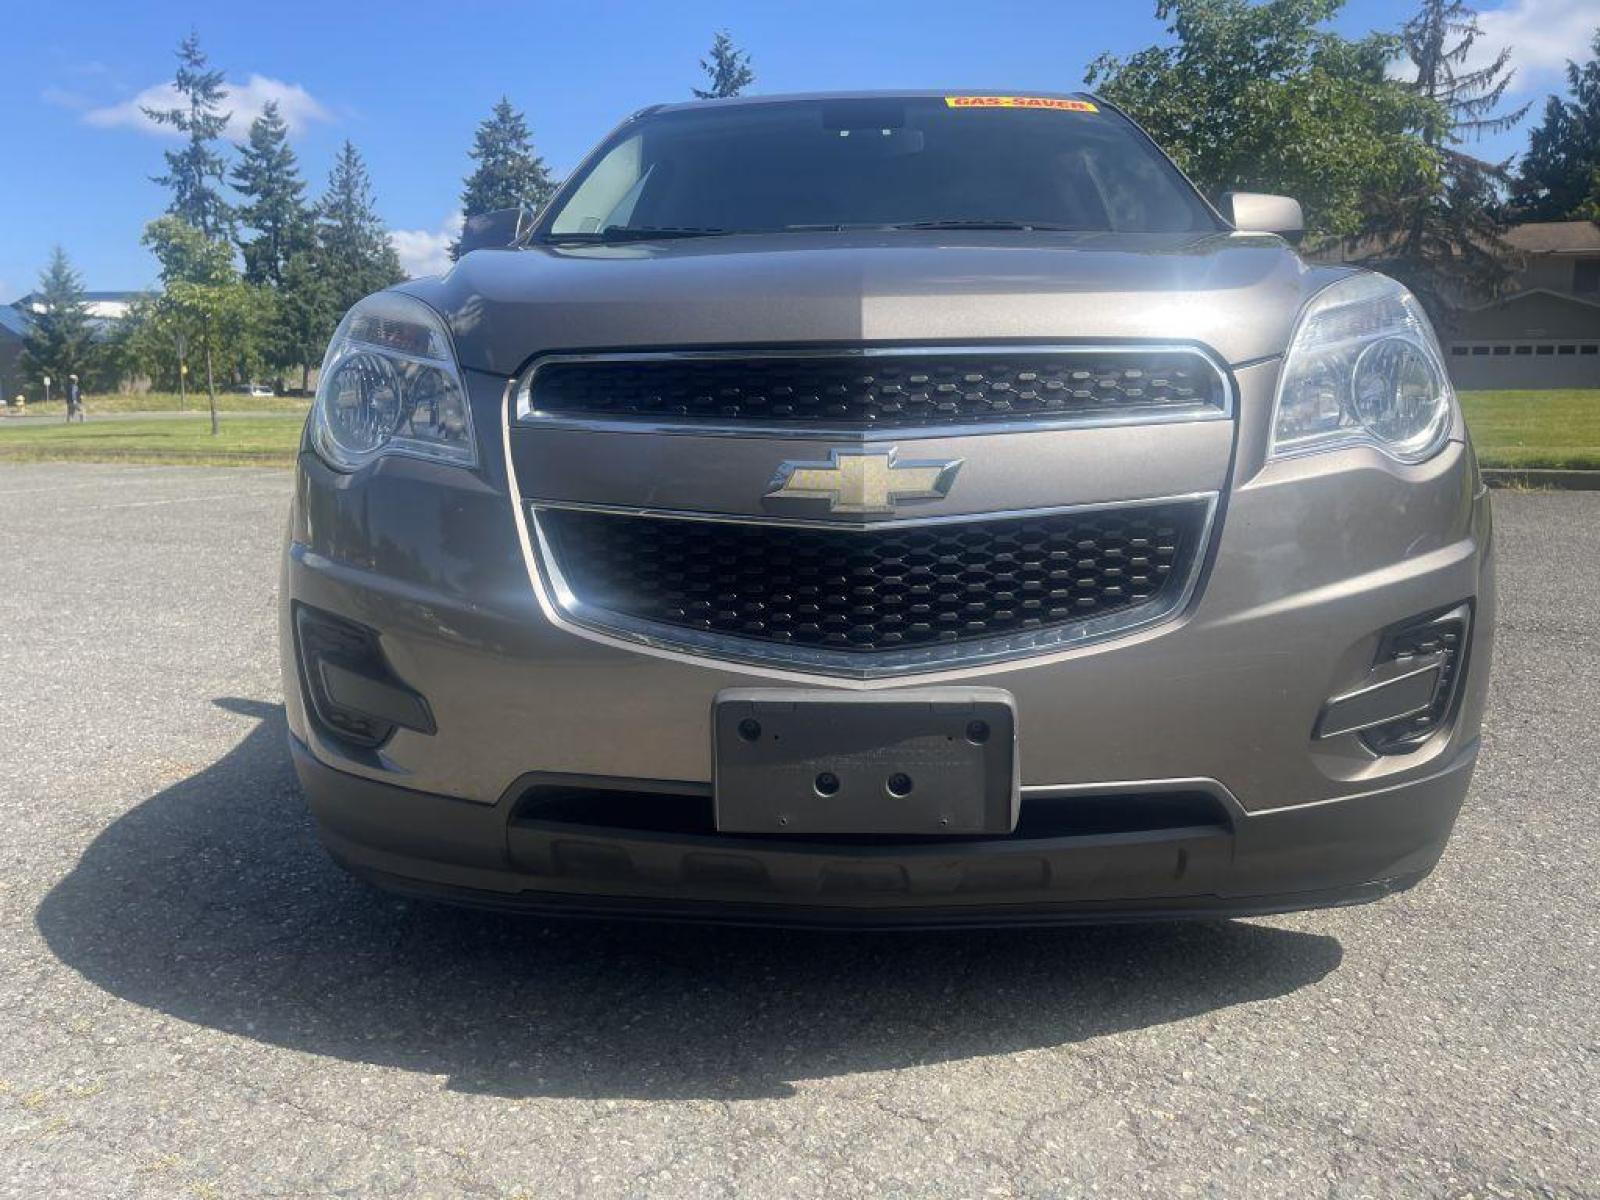 2012 GOLD /BLACK CHEVROLET EQUINOX LT SPRT UTILITY FLEX FUEL (2GNFLEEK2C6) with an 2.4L engine, Automatic transmission, located at 1505 S 356th St., Federal Way, WA, 98003, 47.282051, -122.314781 - Reduced price to $7,999!! Runs great! And will handle wonderful in the rain and PNW weather conditions during fall and winter! This Equinox is a great compact SUV with engaging handling and enough gusto for daily driving, but very good gas mileage with the Flex Fuel package. Very roomy five-sea - Photo #3